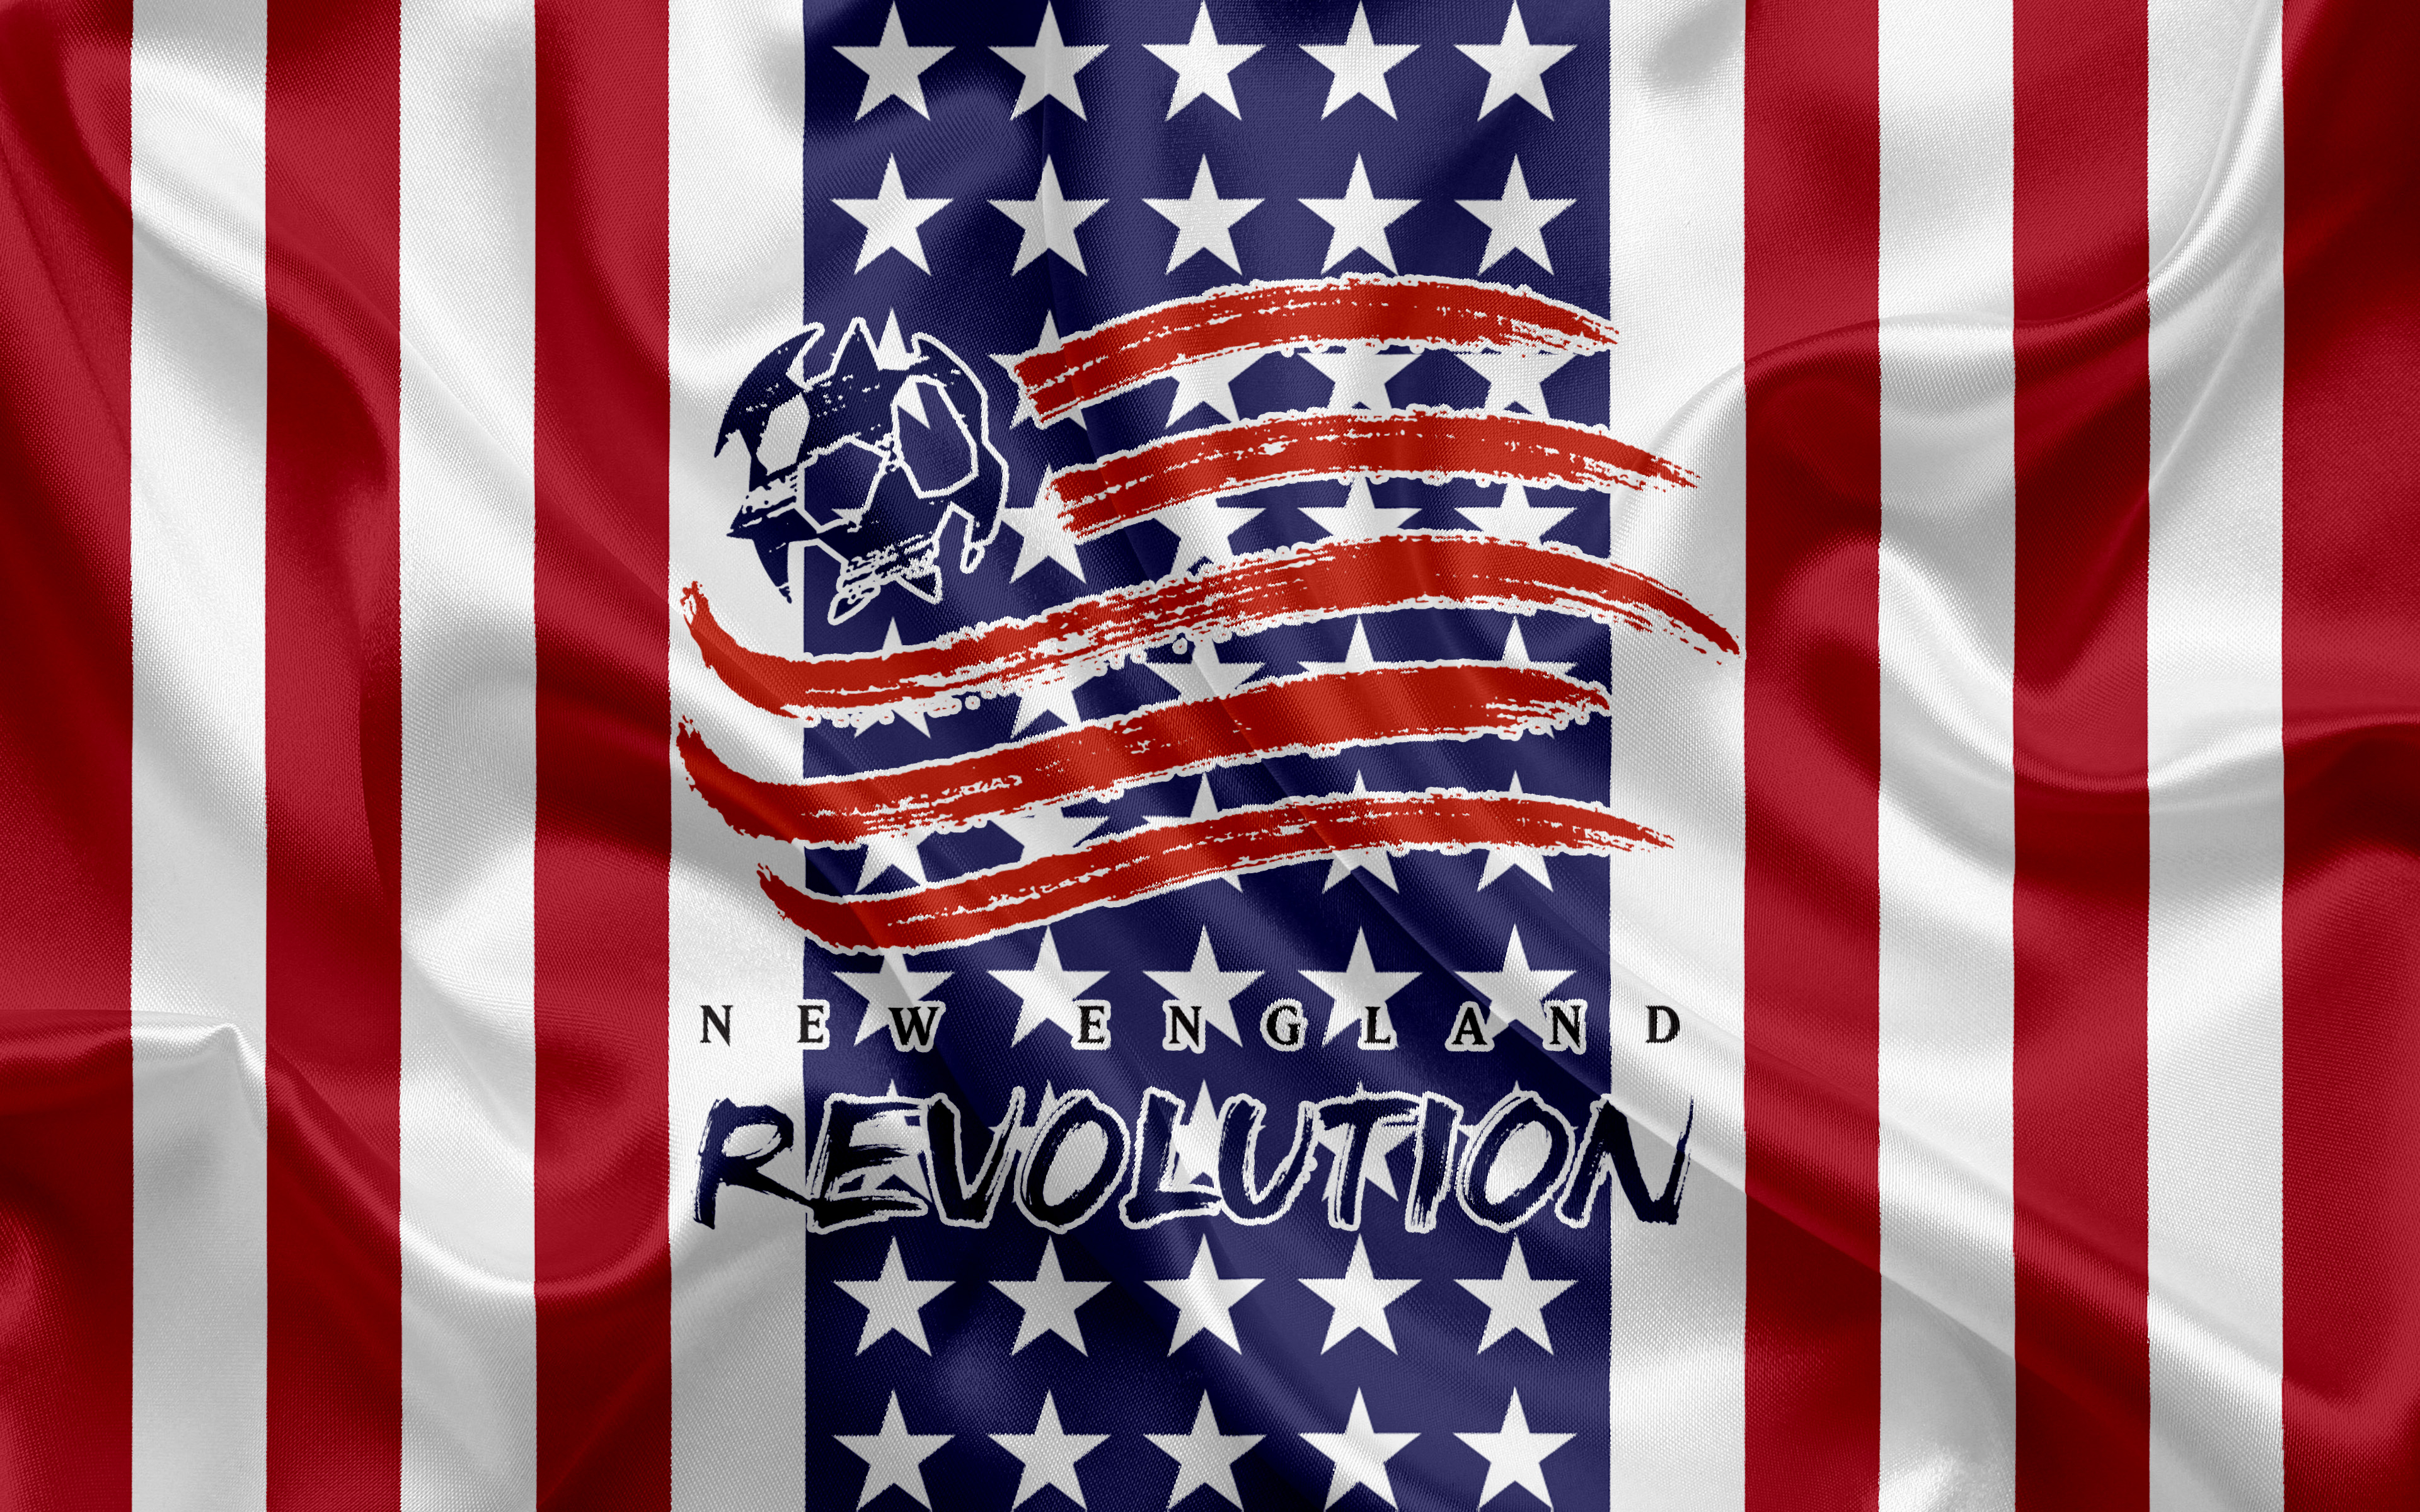 Download New England Revolutions Old Insignia. Wallpaper